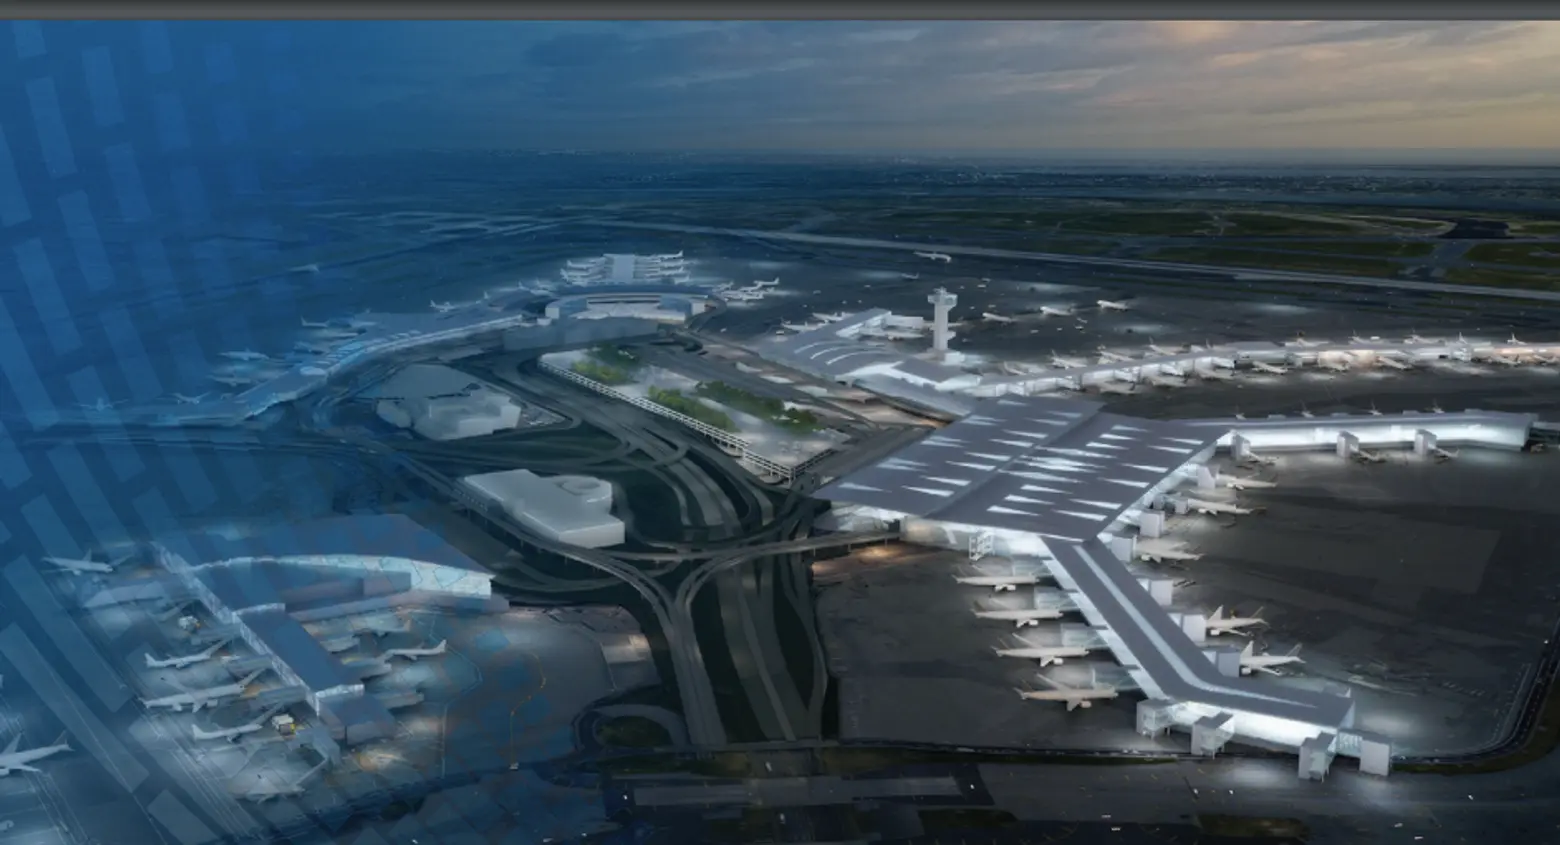 JFK Central, port authority of new york and new jersey, jfk airport, transportation, design